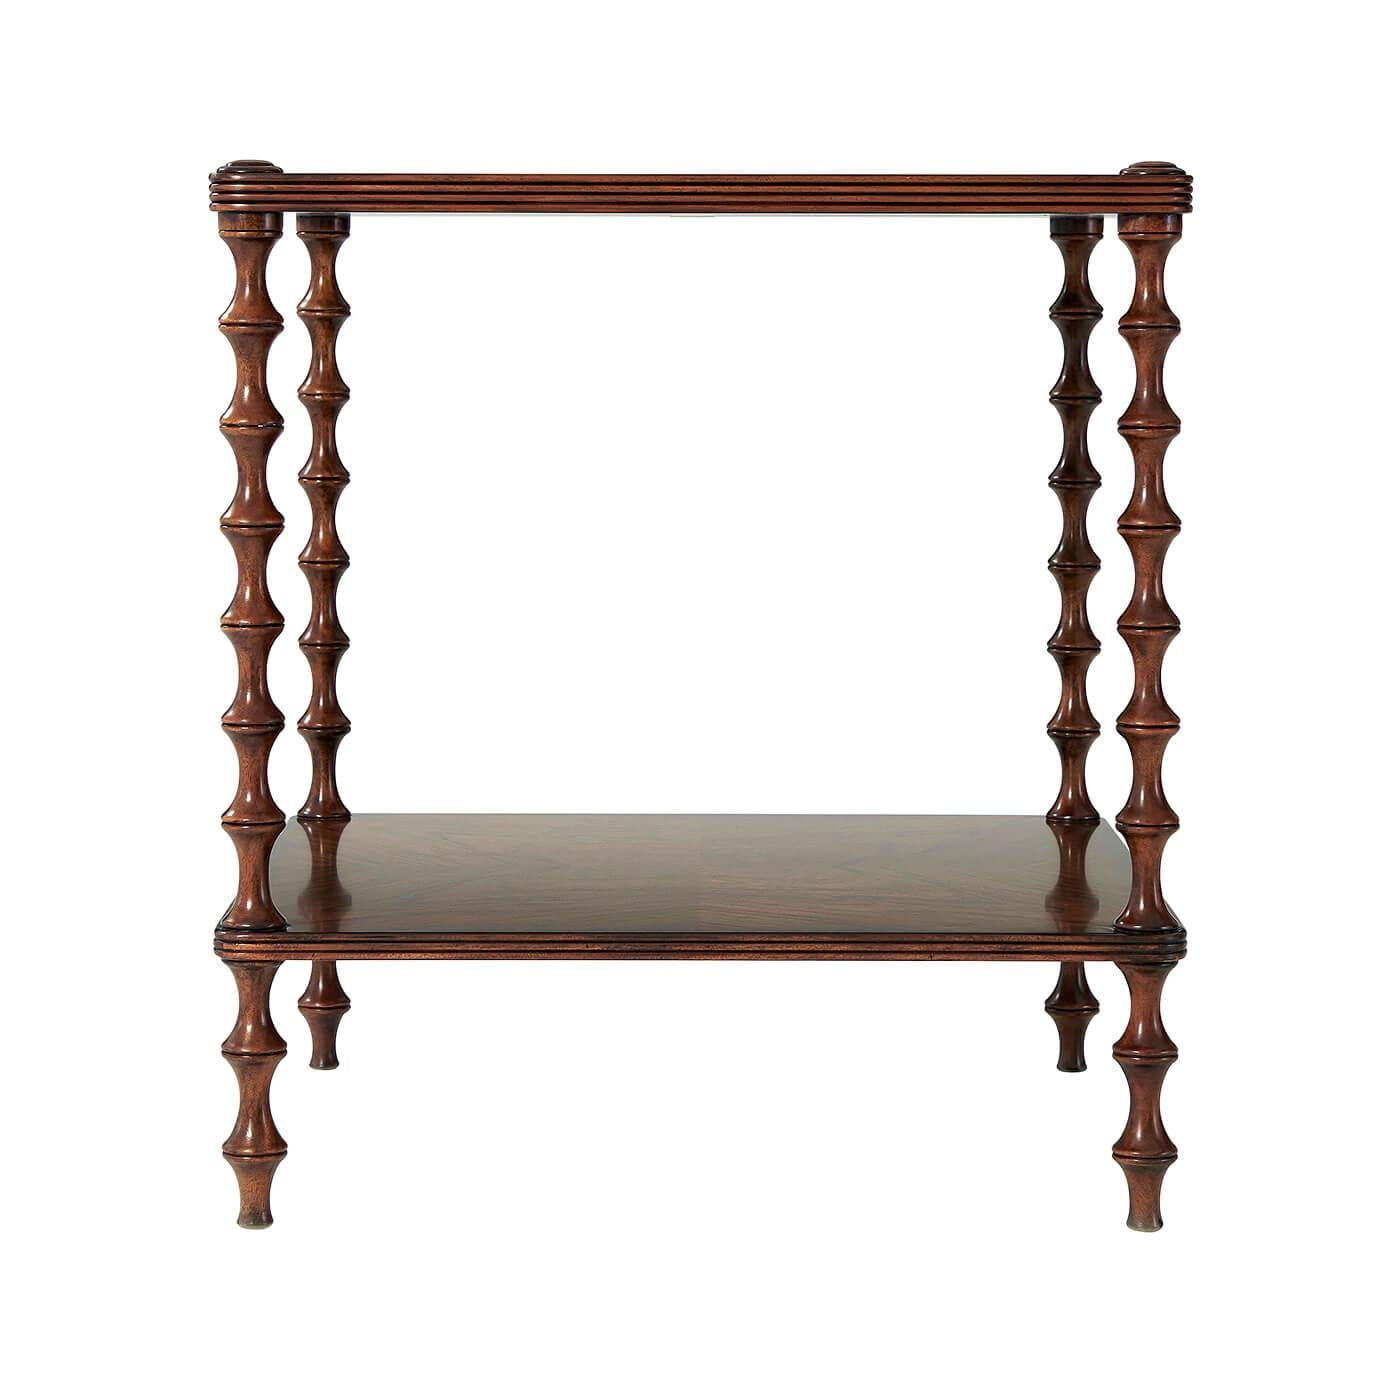 A Pacific walnut side table, the square top with rounded corners and a reeded edge above a similar under tier, on bobbin turned legs.

Dimensions: 26